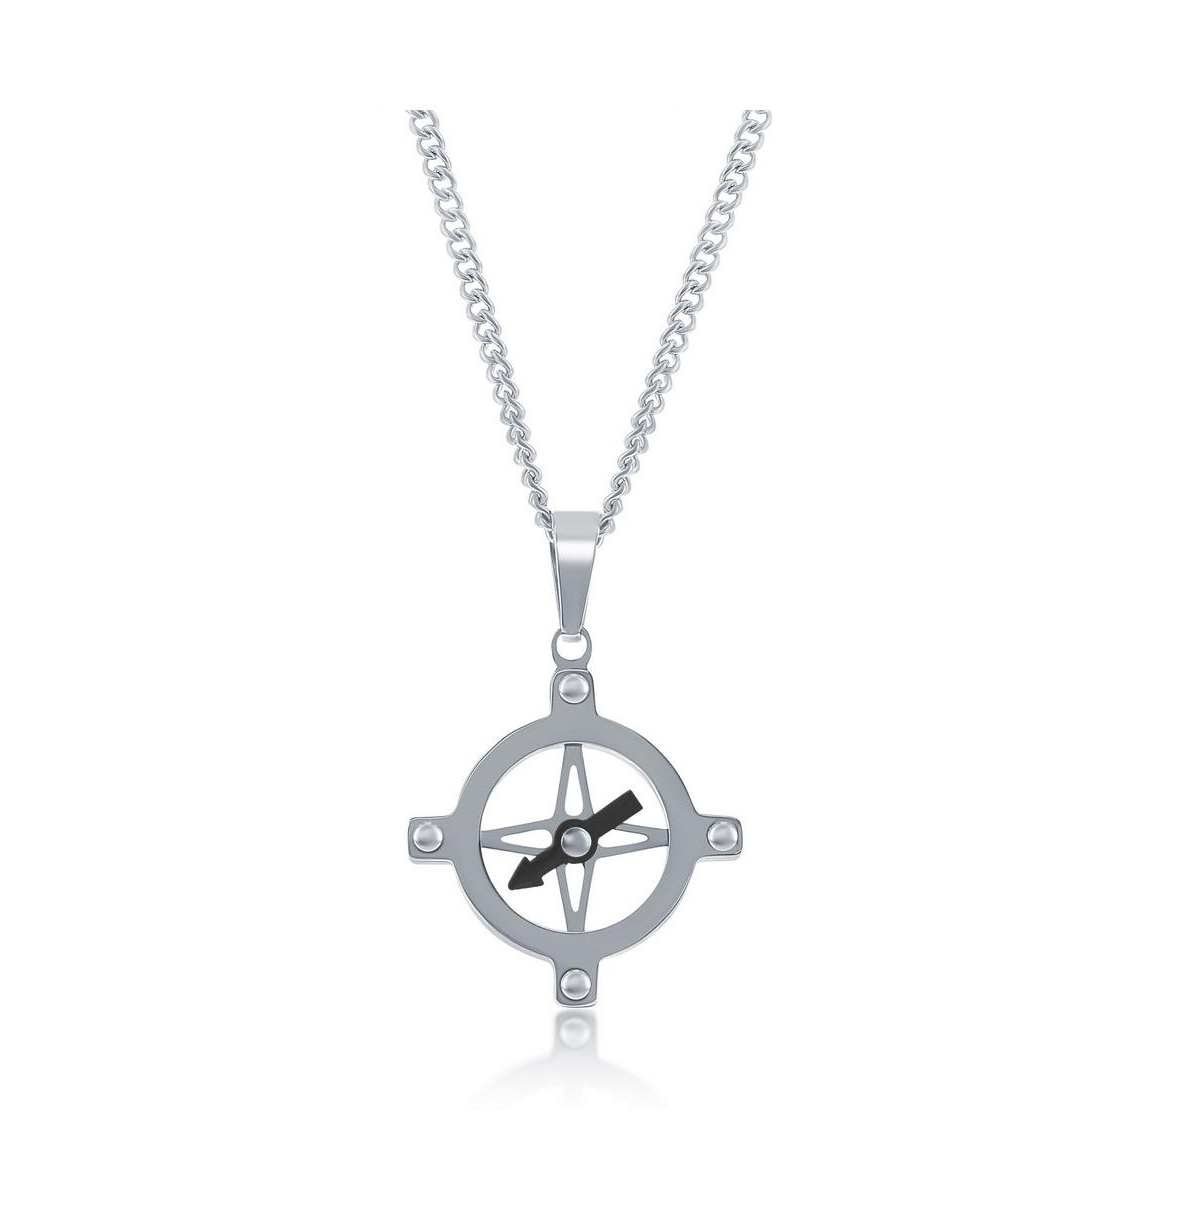 Stainless Steel Compass Necklace - Silver